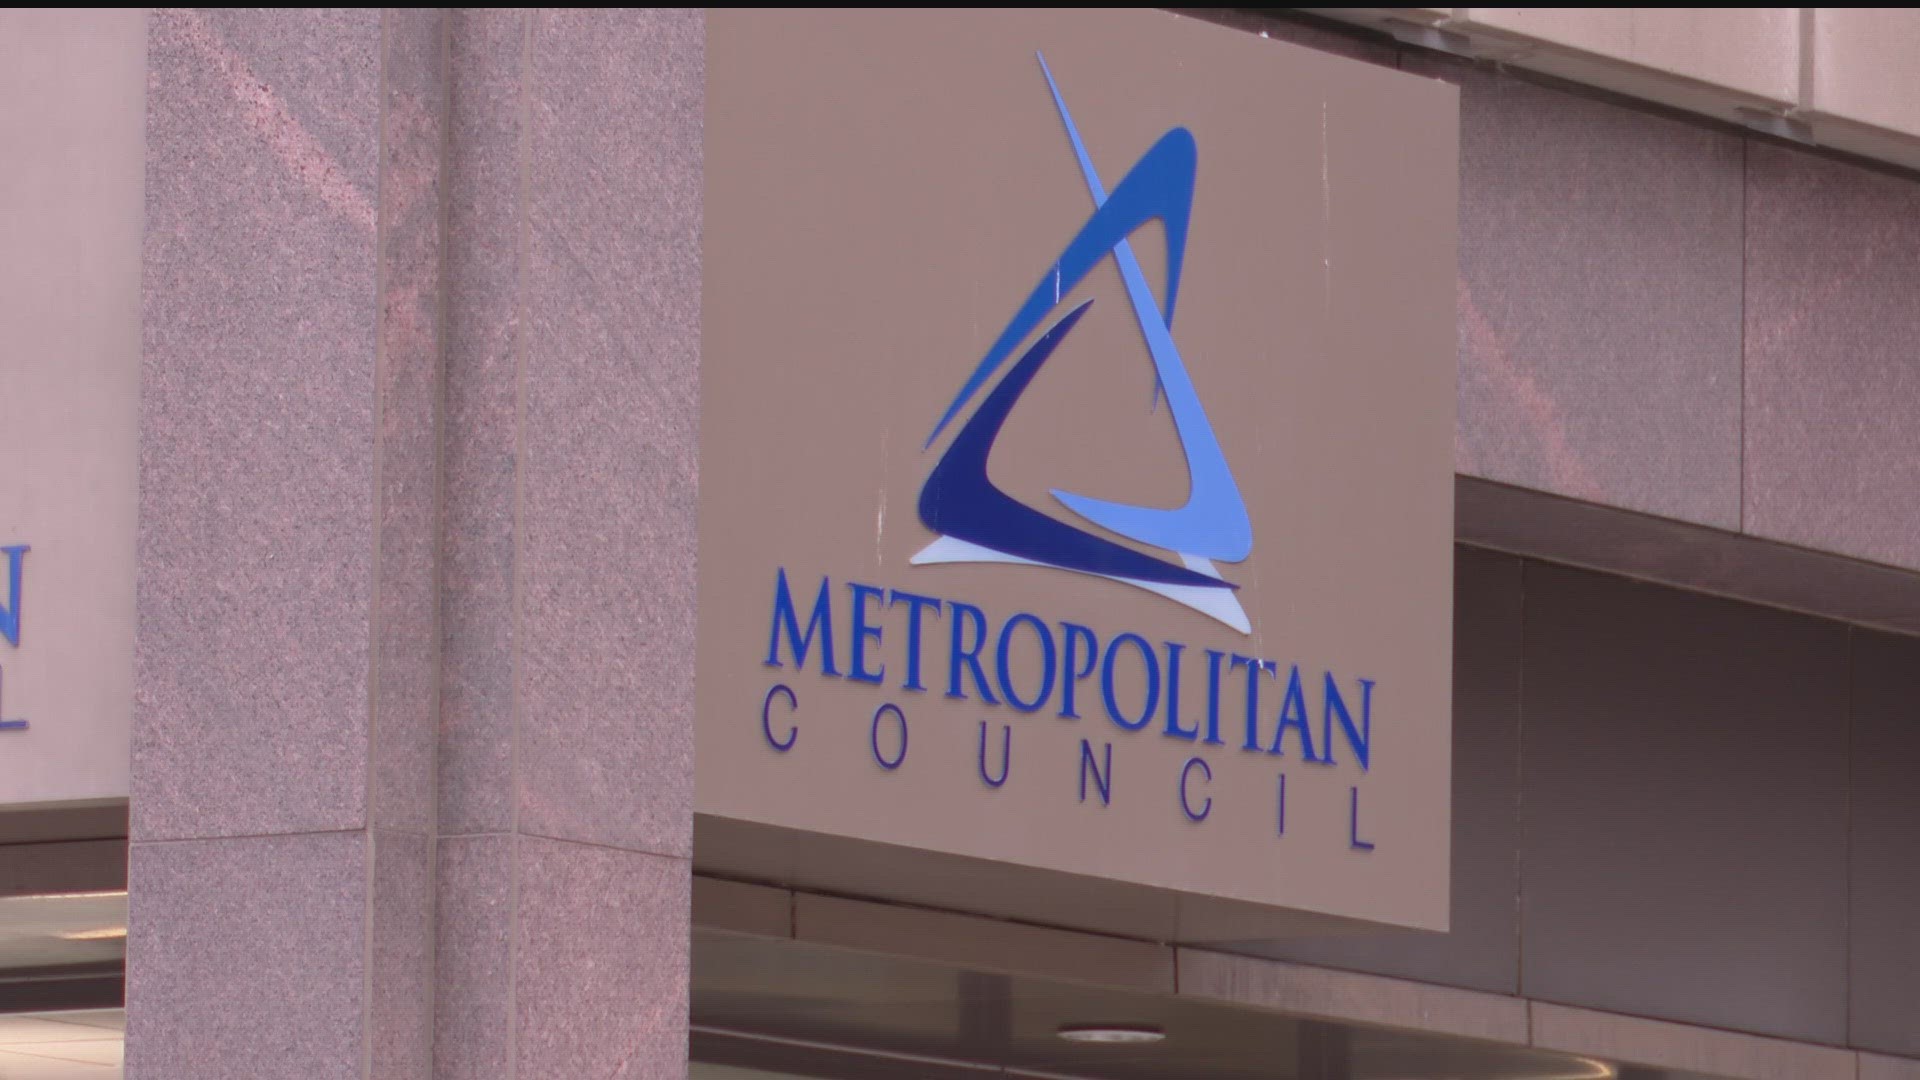 The task force will examine the Met Council over the next six months before deciding what changes need to be made.